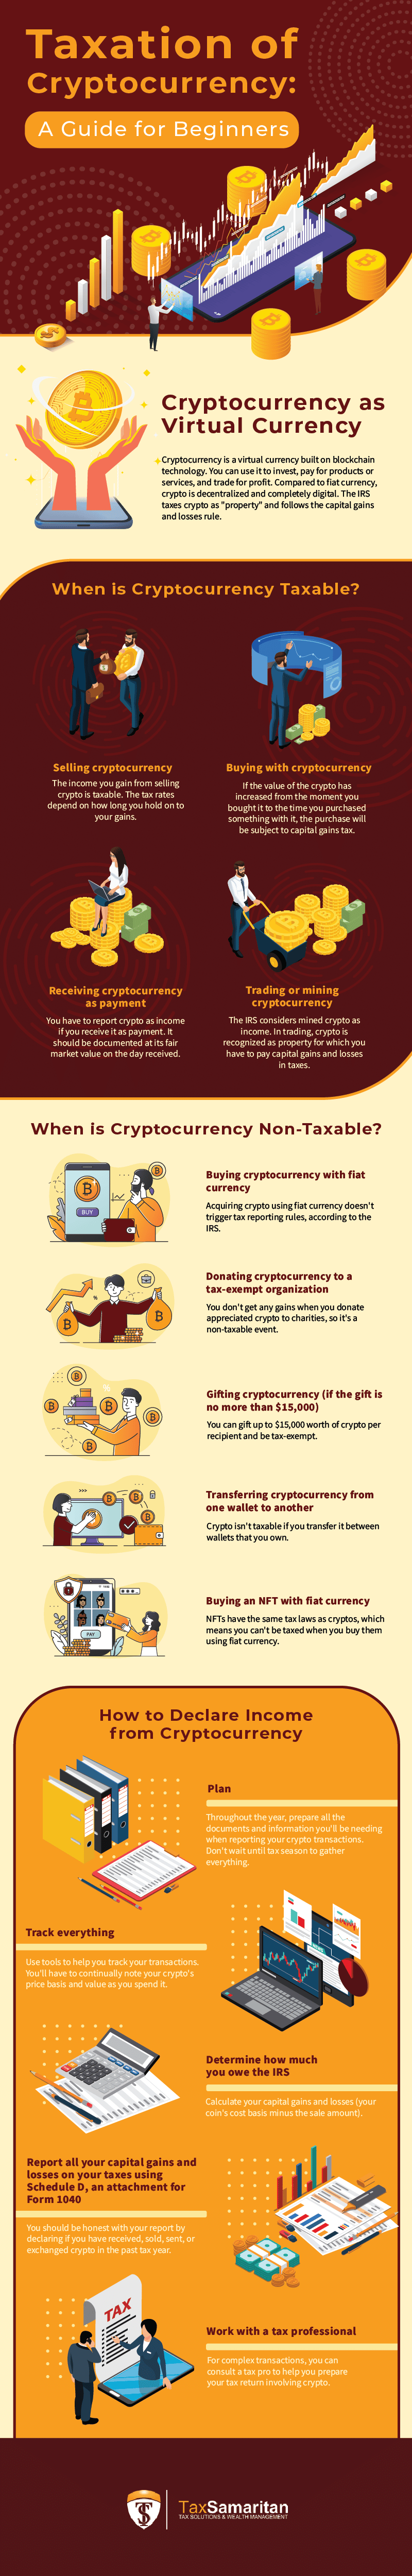 Taxation of Cryptocurrency
